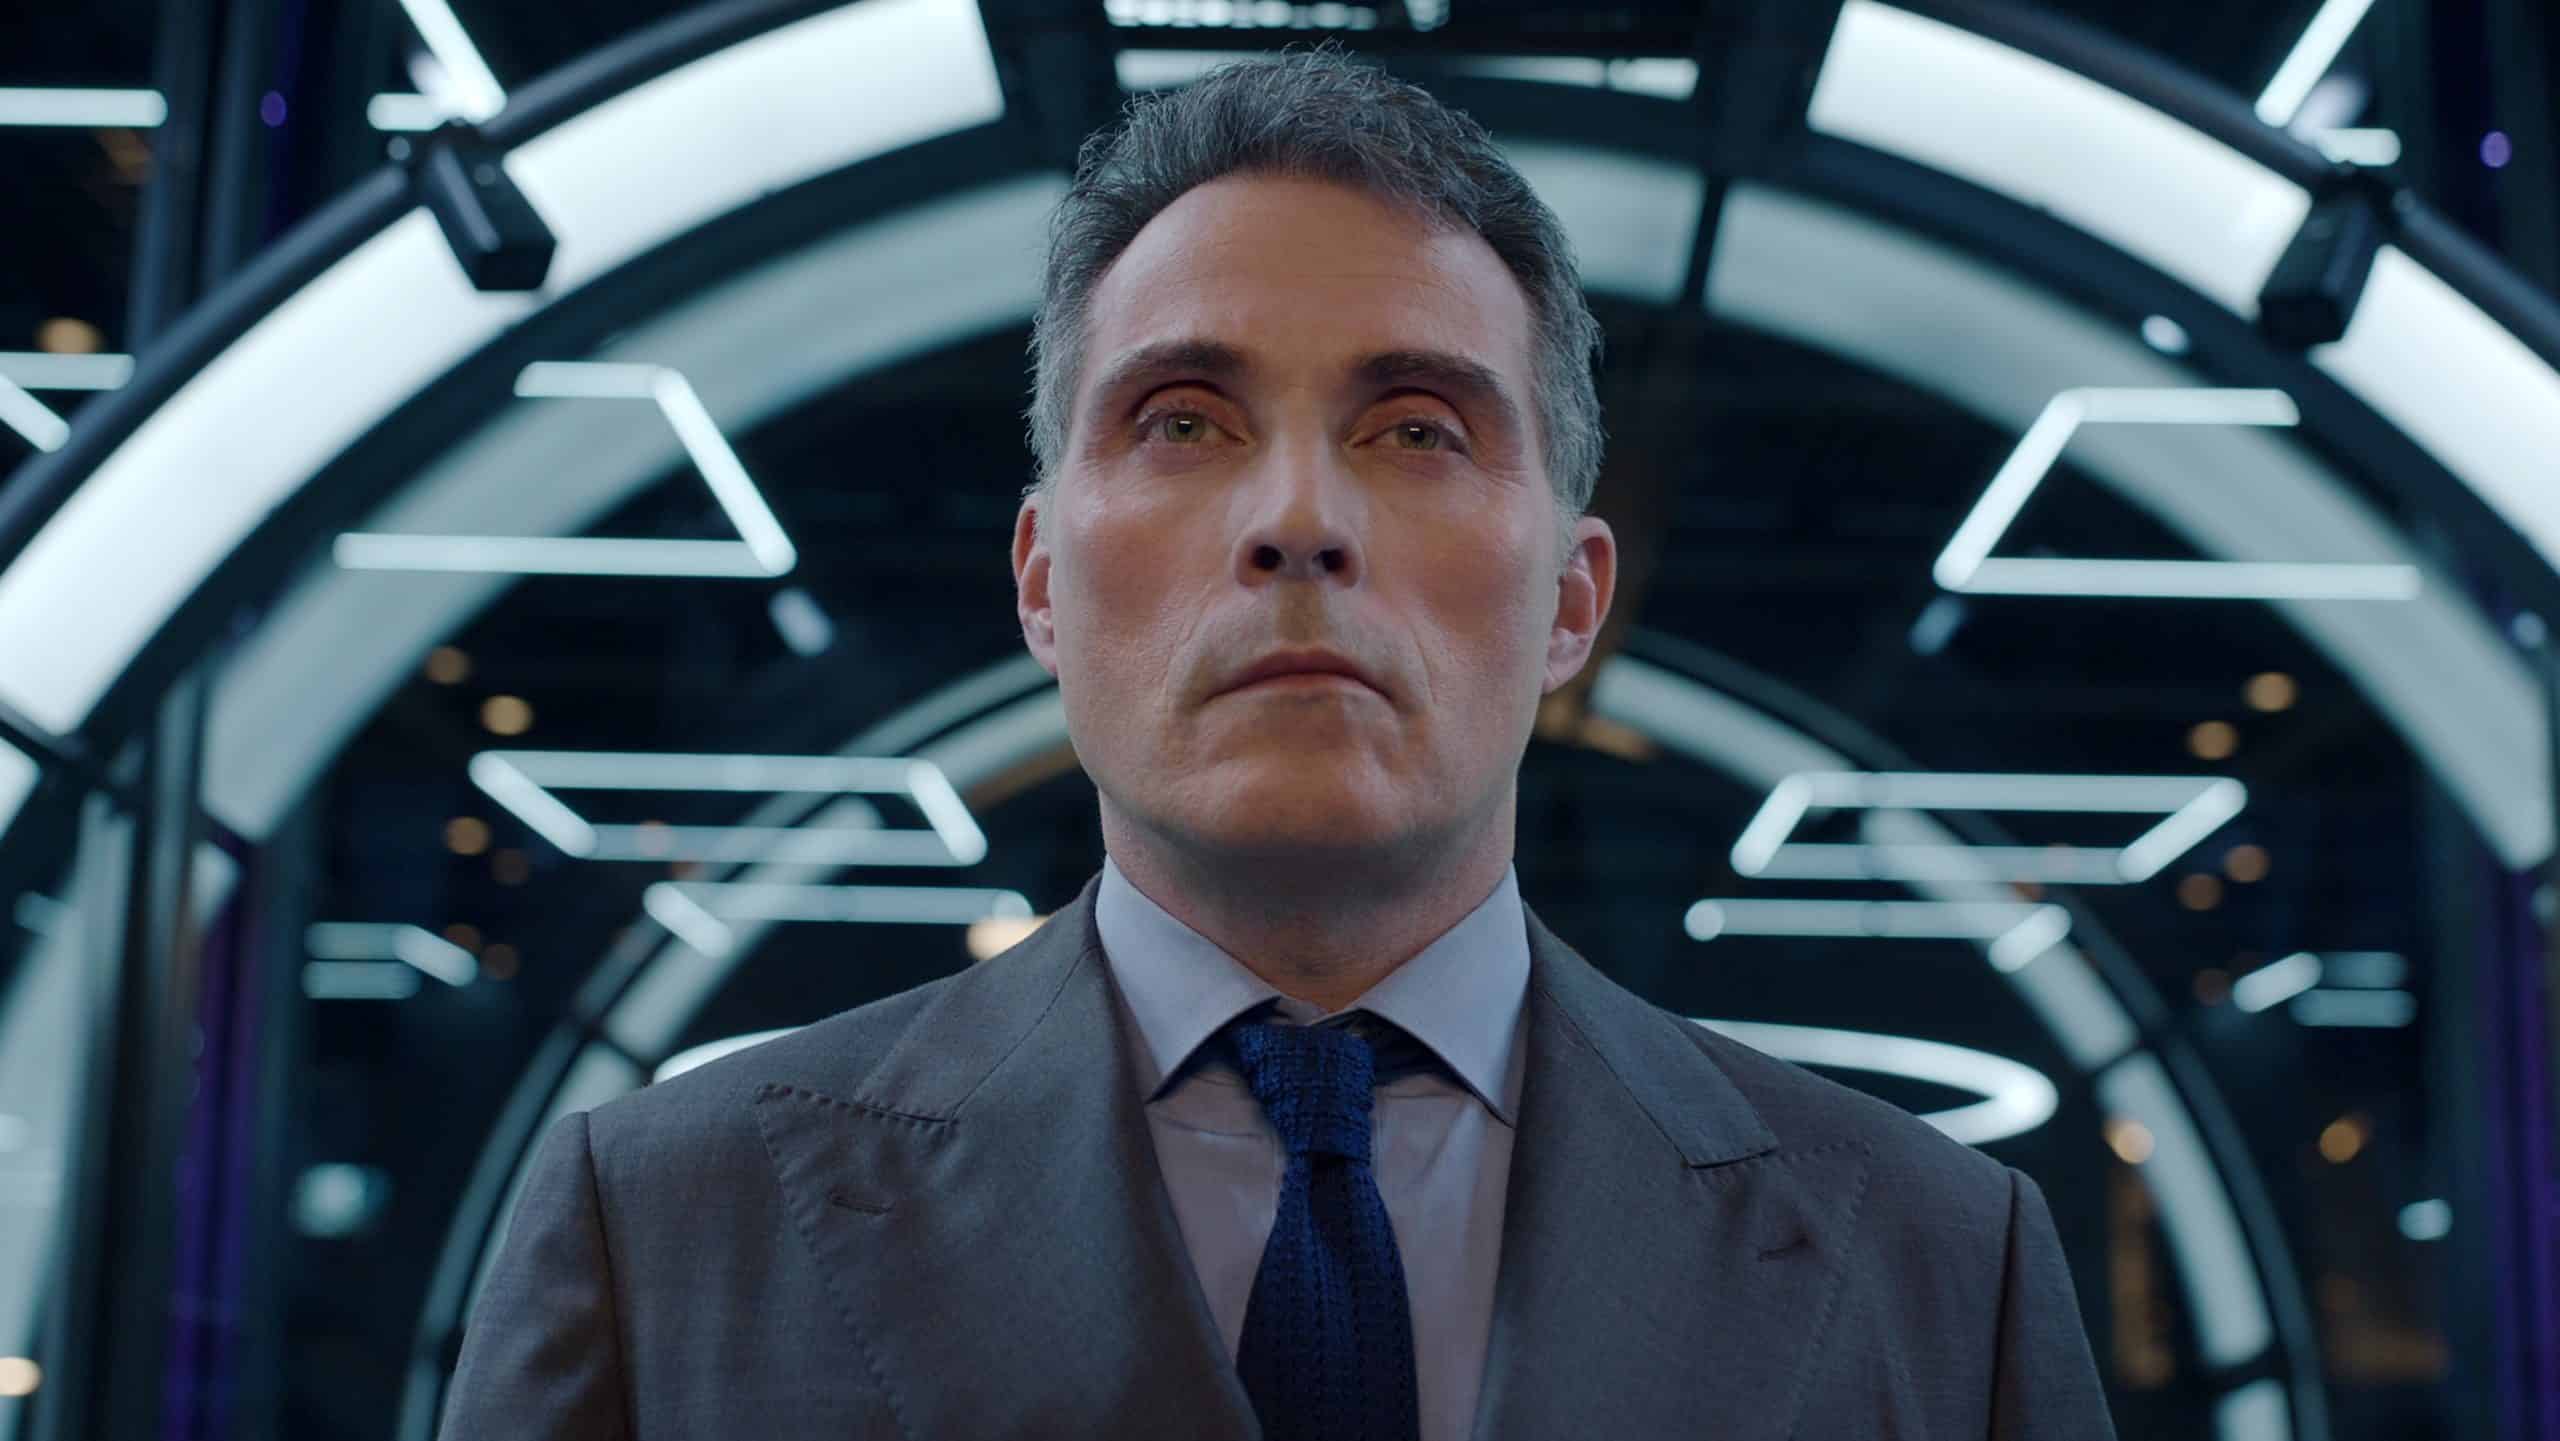 Rufus Sewell as Roger Salas in episode “Blue” 